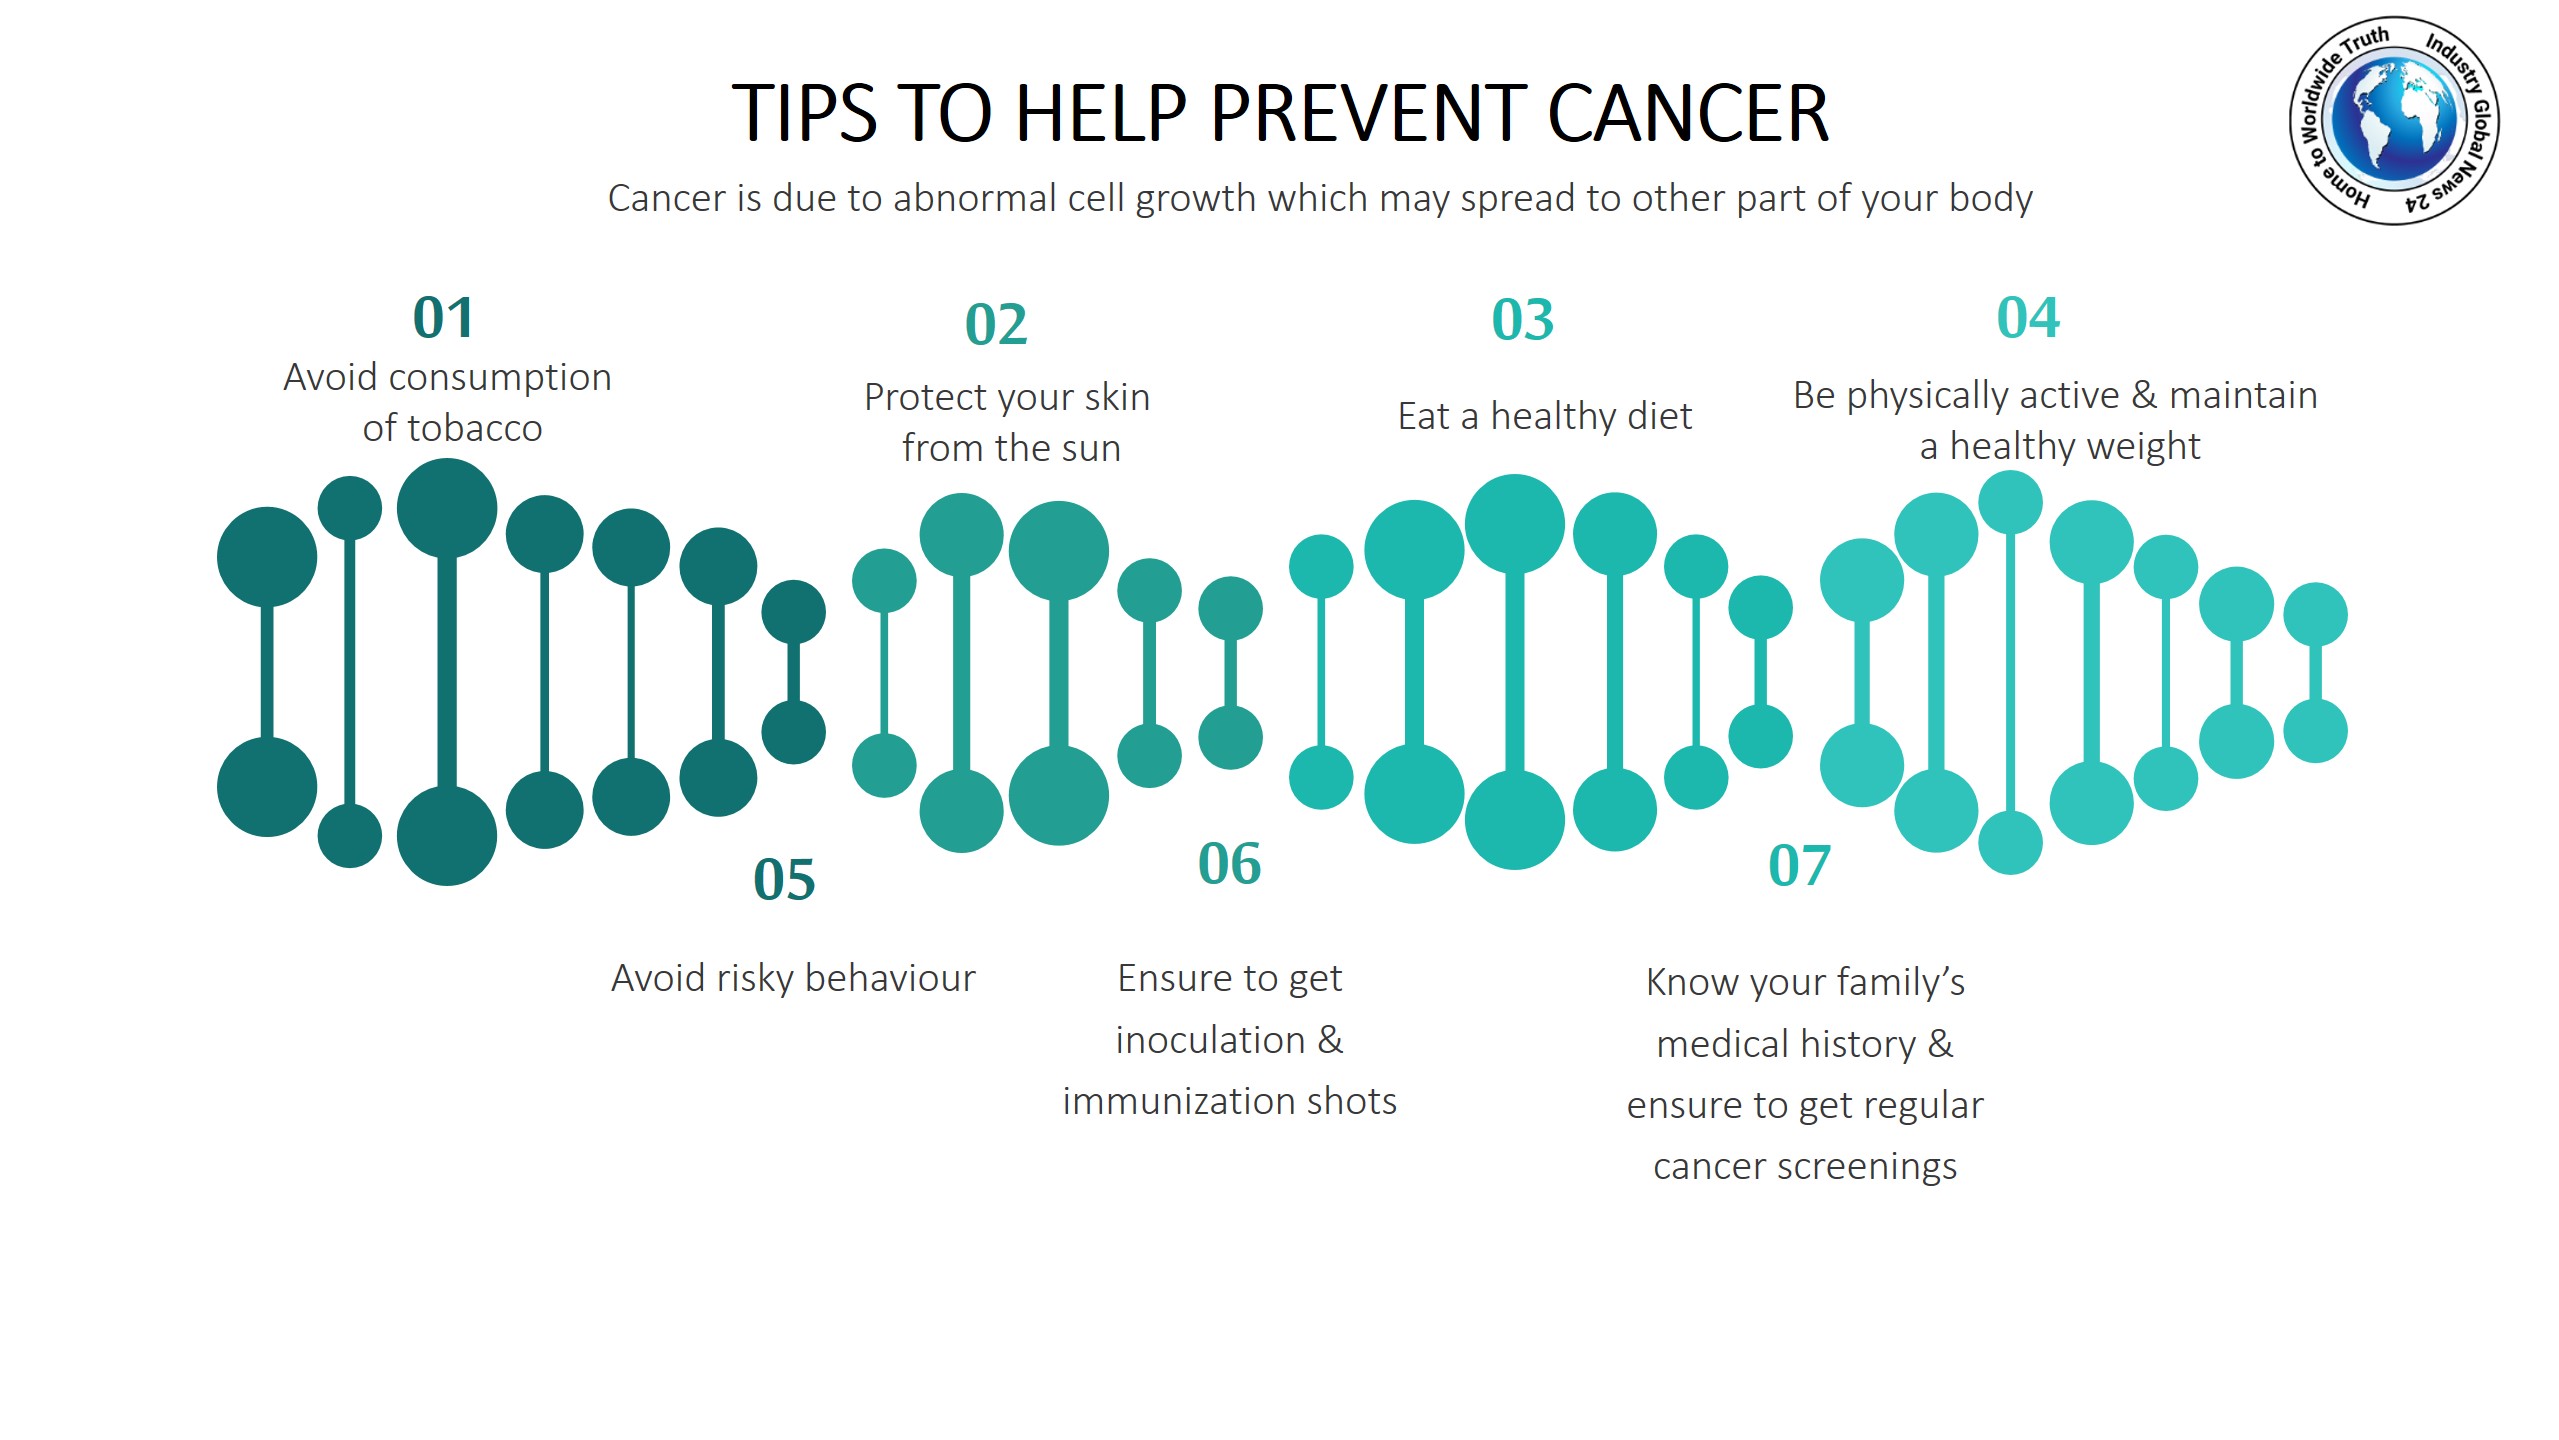 Tips to help prevent cancer